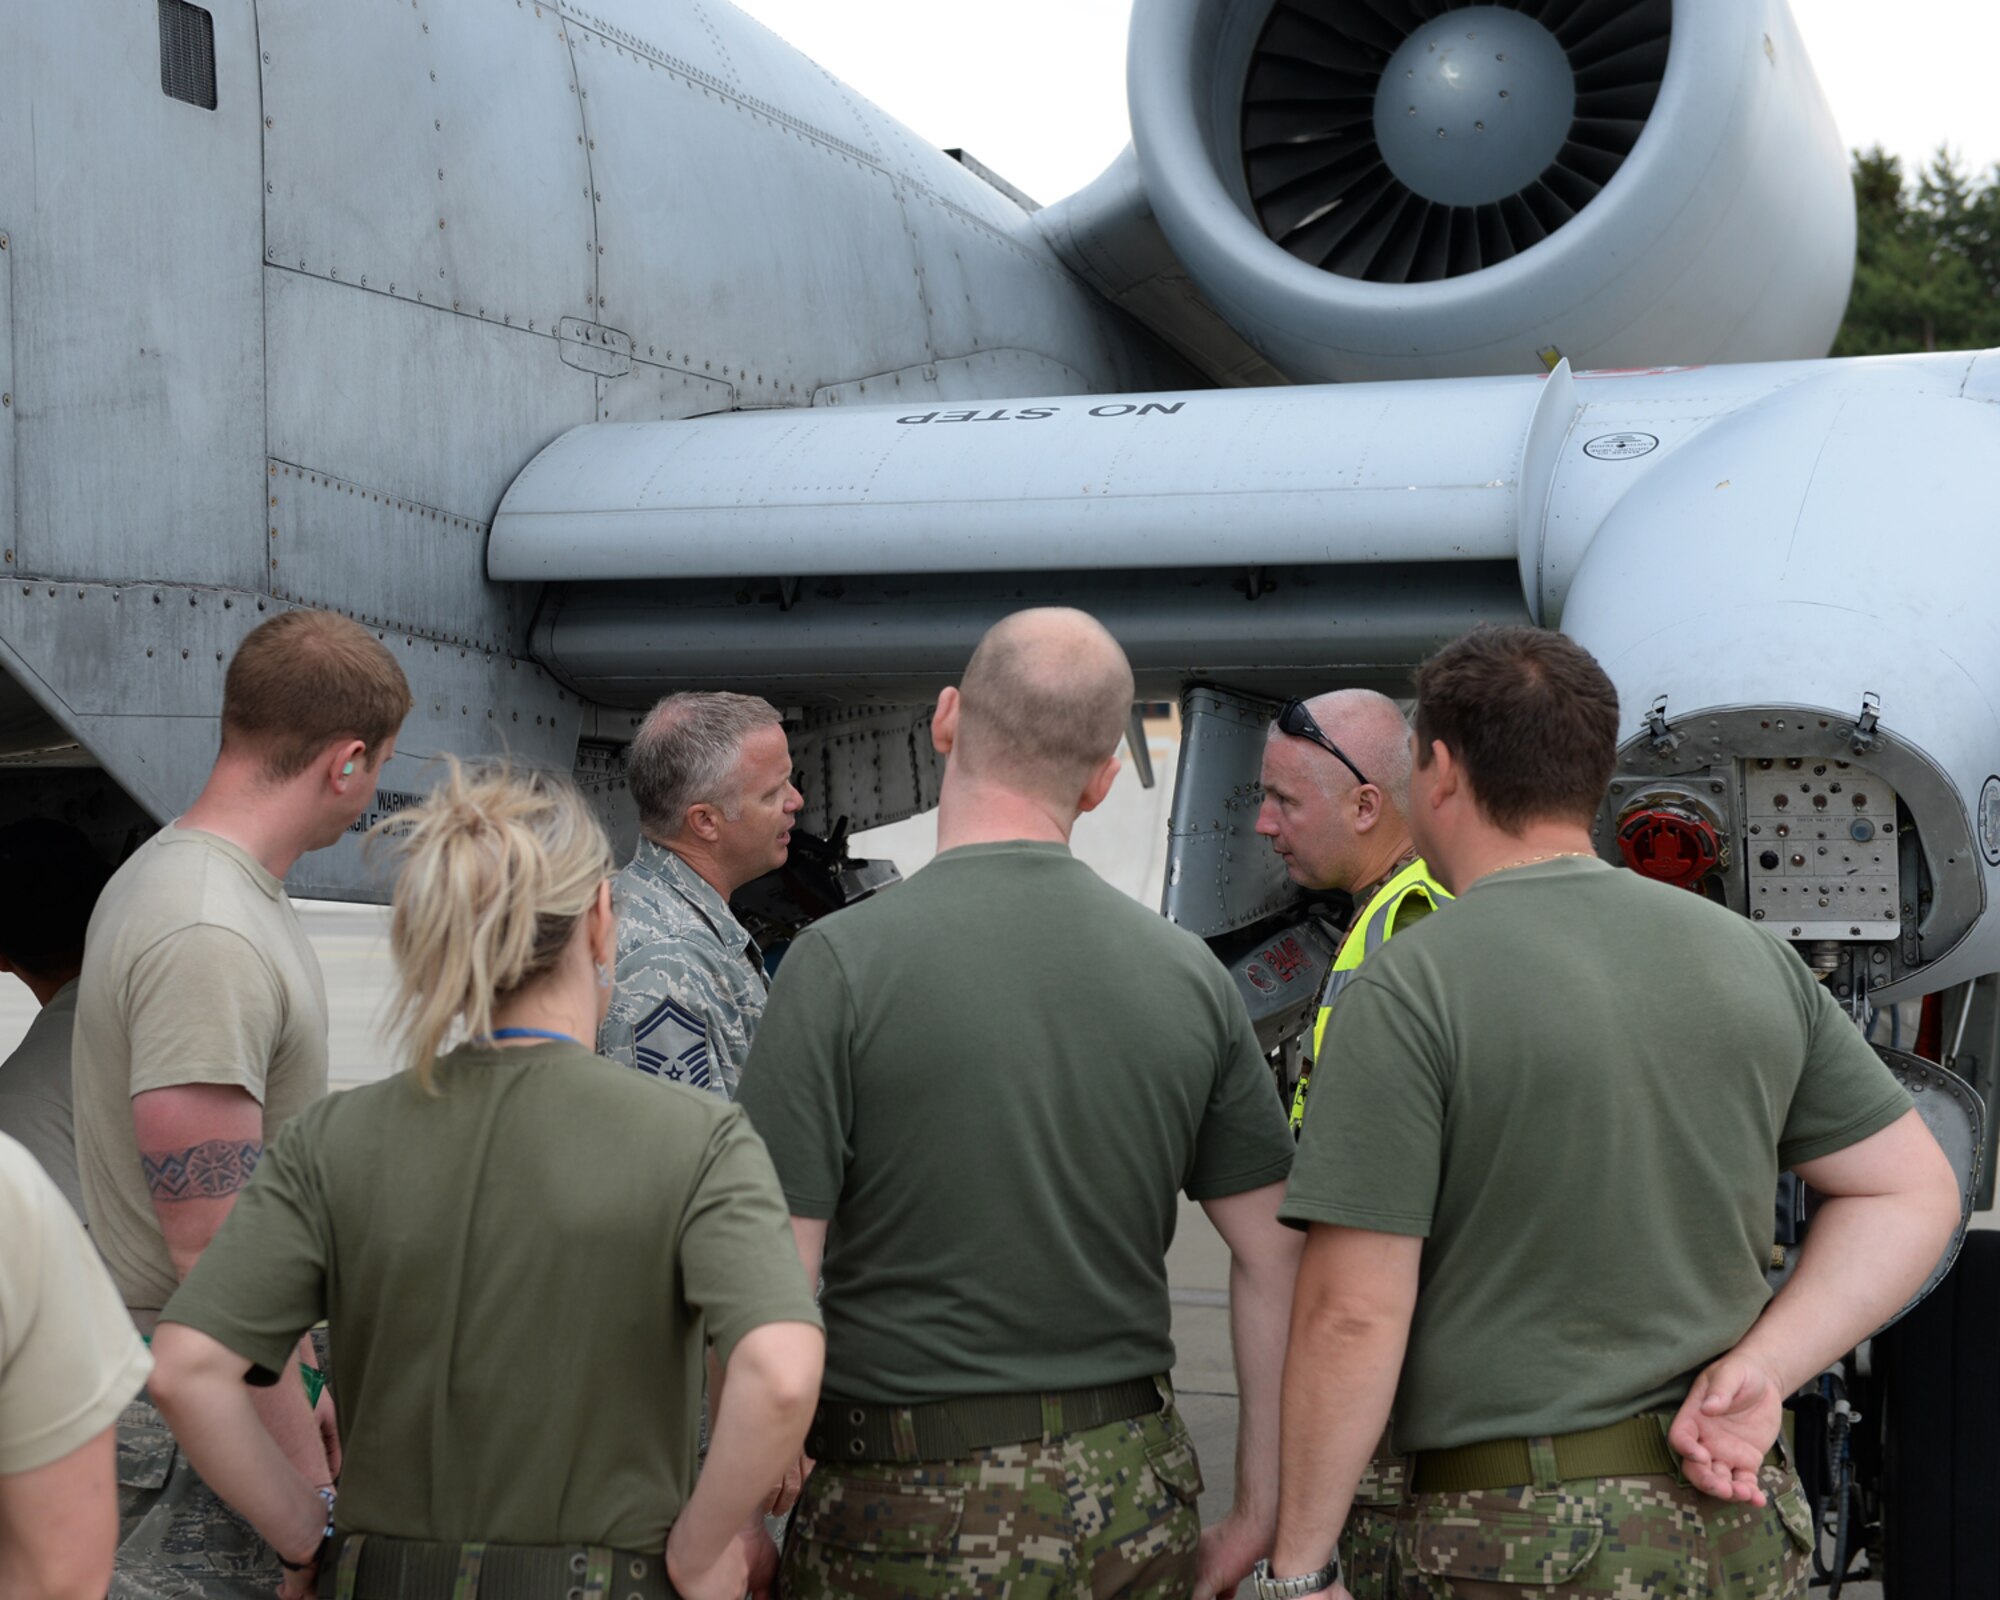 Two U.S. Air Force Airmen from the 354th Expeditionary Fighter Squadron give a tour of an A-10 Thunderbolt II attack aircraft assigned to the 354th EFS  to members of the Slovakia air force during a theater security package deployment at Sliac Air Base, Slovakia,  May 20, 2015. More than 40 Airmen from the 354th EFS deployed to Slovakia to participate in a theater security package in support of Operation Atlantic Resolve. (U.S. Air Force photo by Senior Airman Dylan Nuckolls/Released)